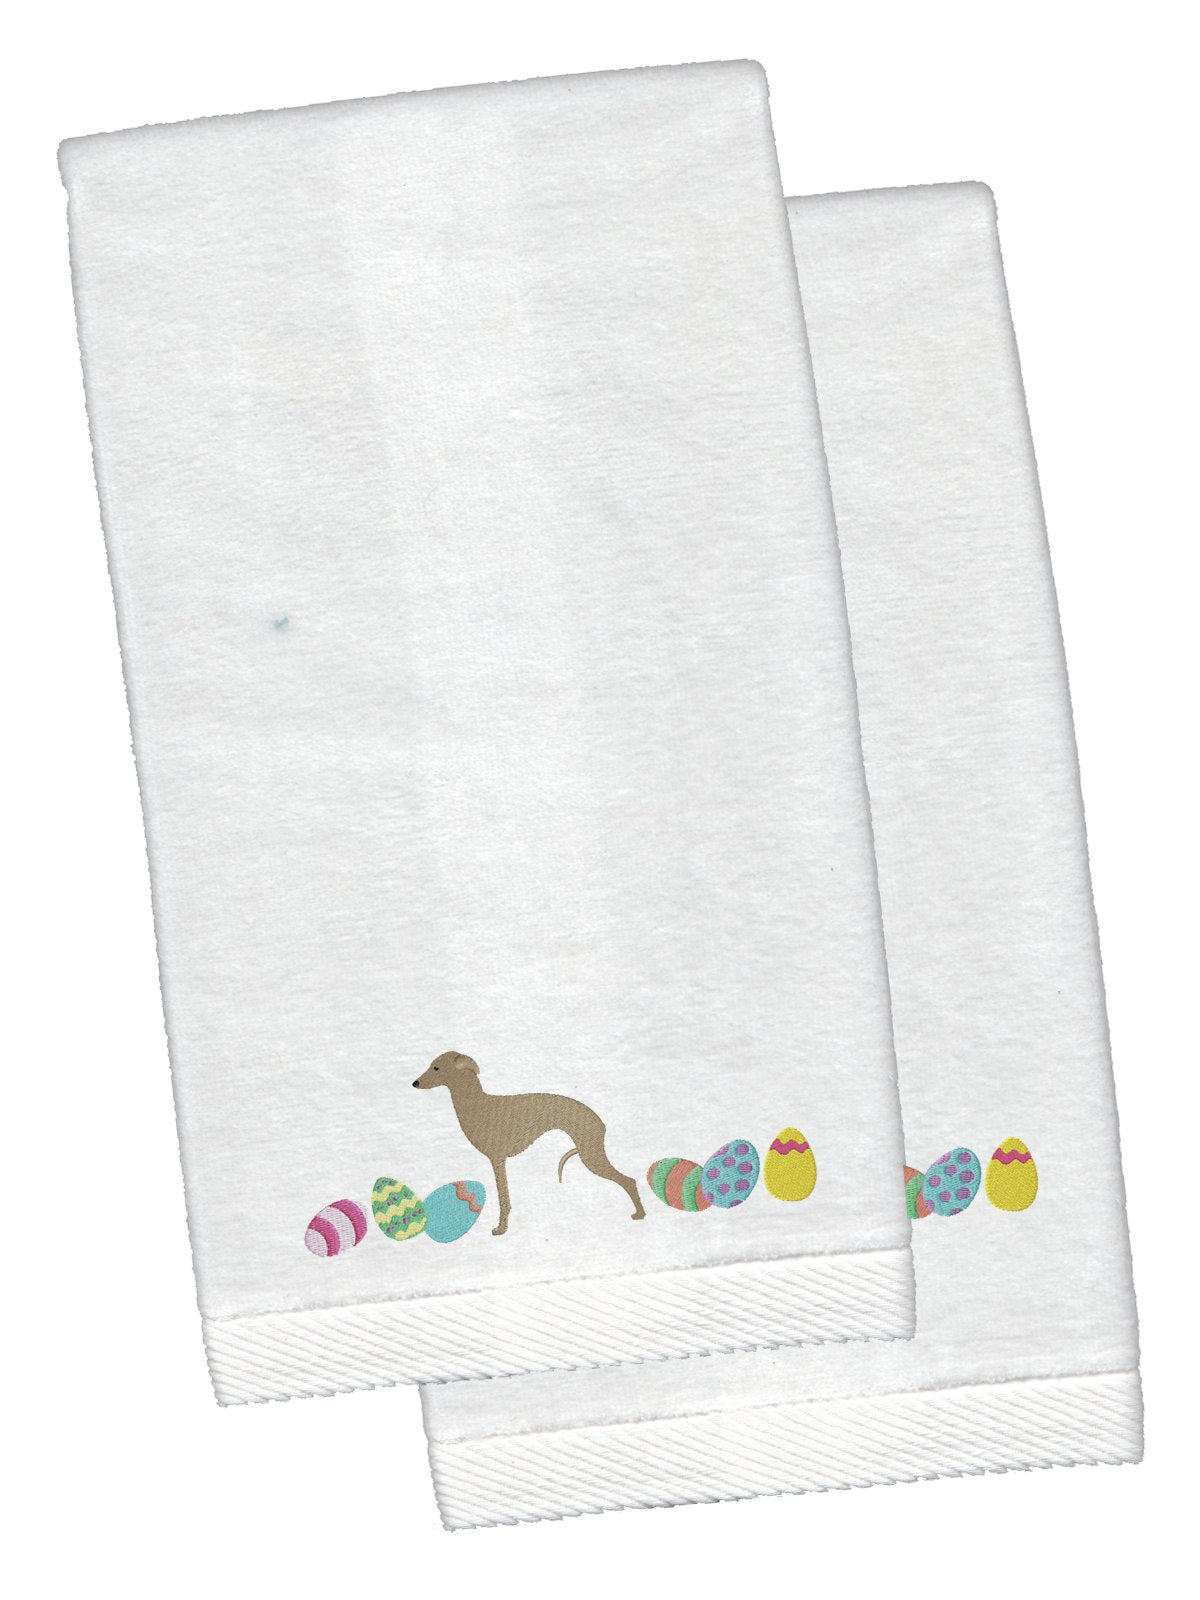 Italian Greyhound Easter White Embroidered Plush Hand Towel Set of 2 CK1655KTEMB by Caroline's Treasures